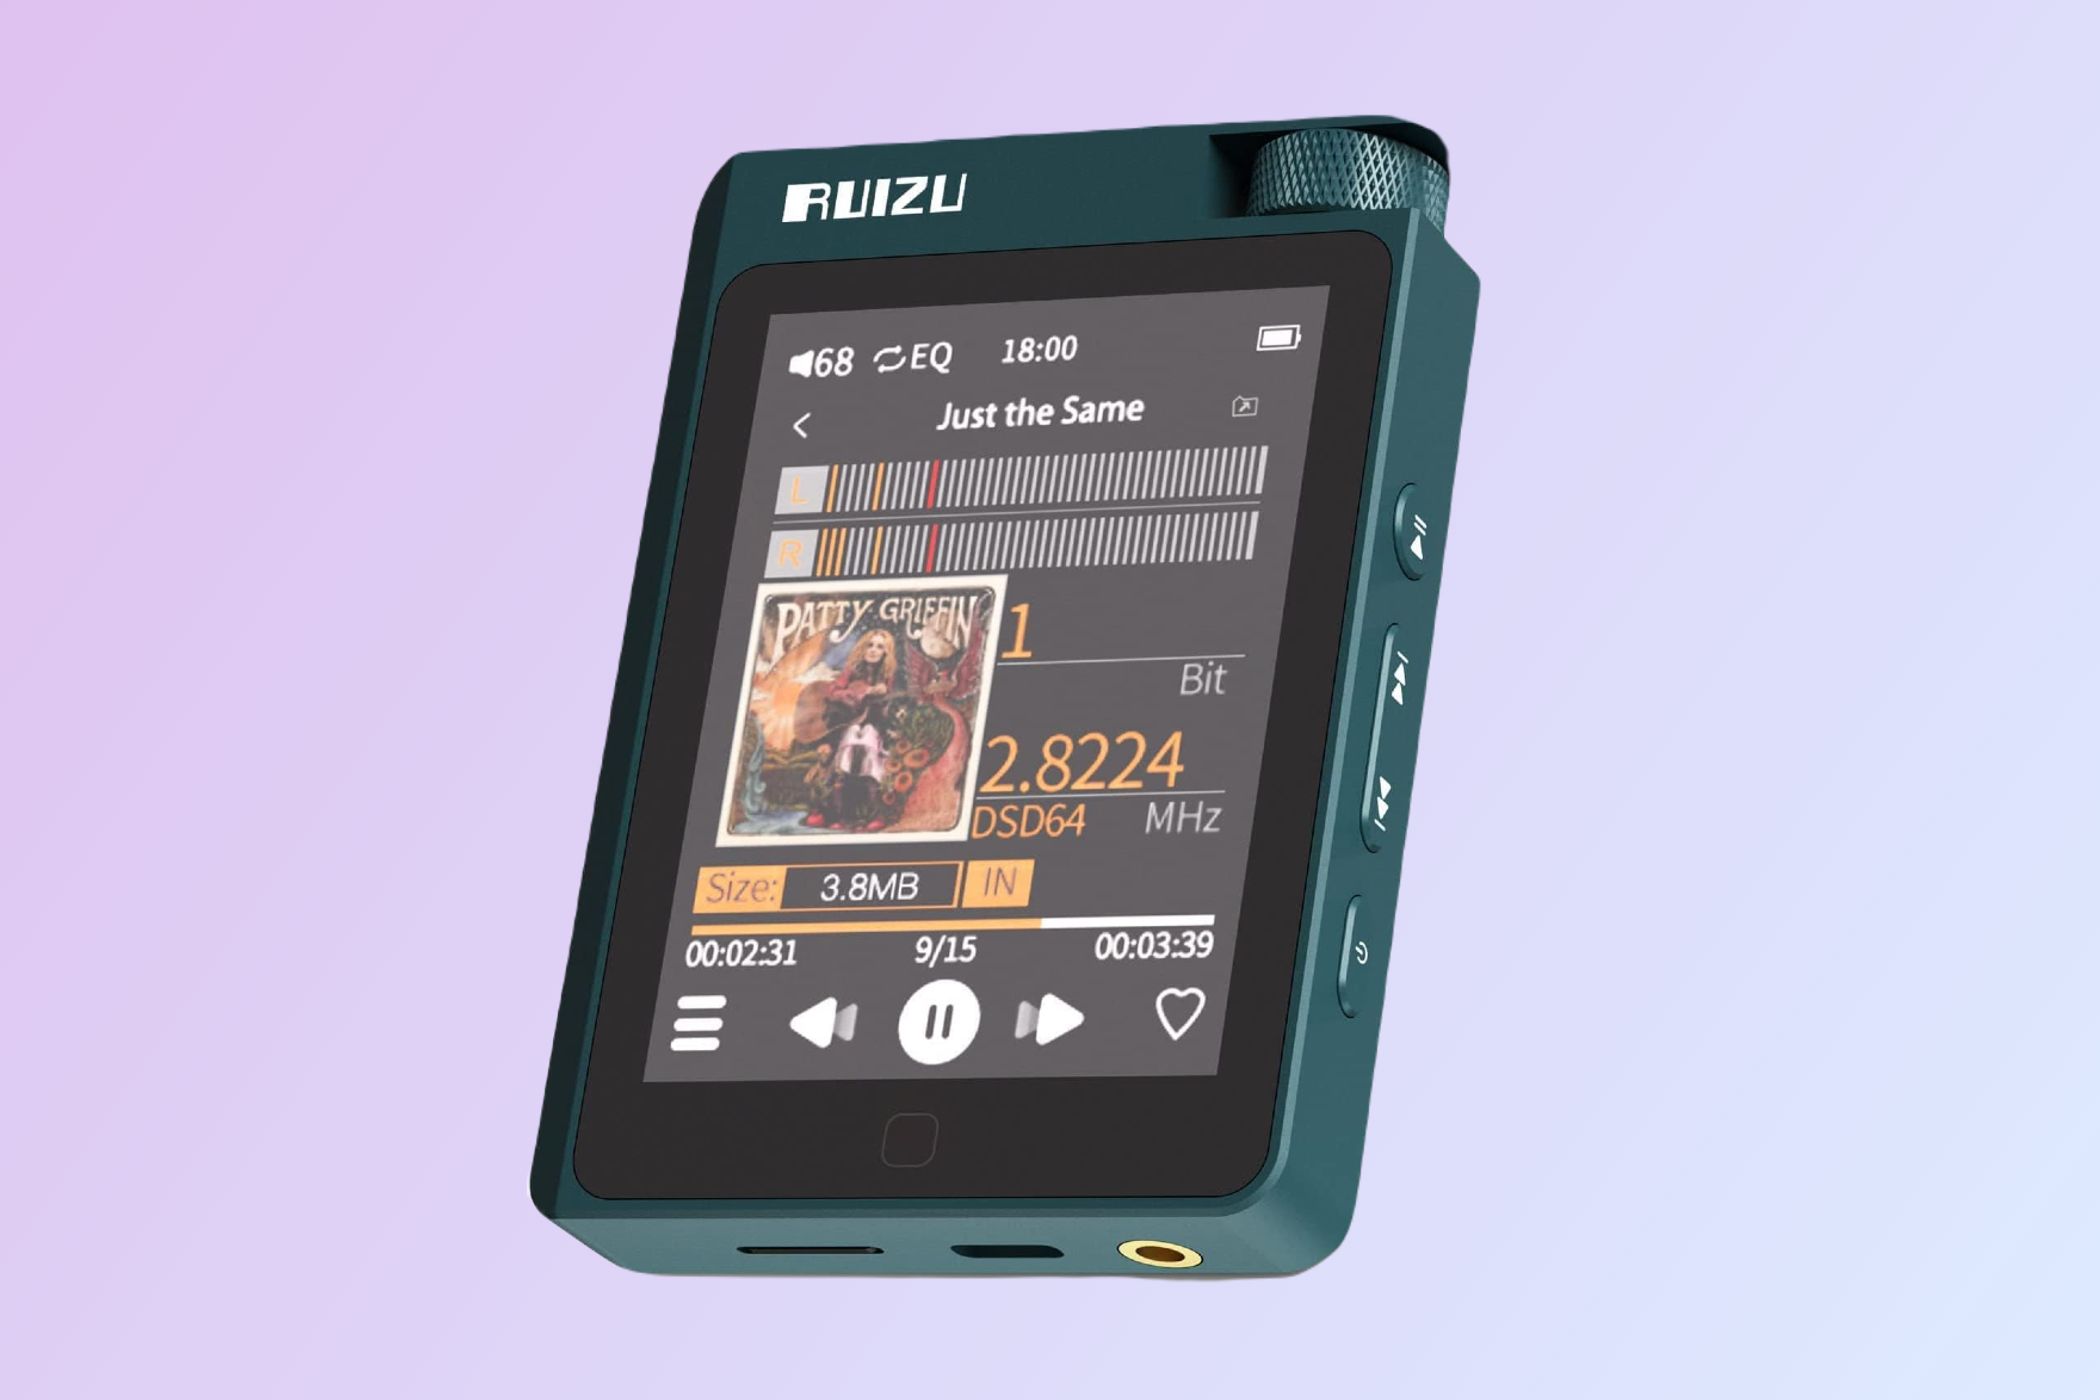 Ruizu A55 MP3 Player showing a song playing on the cover screen